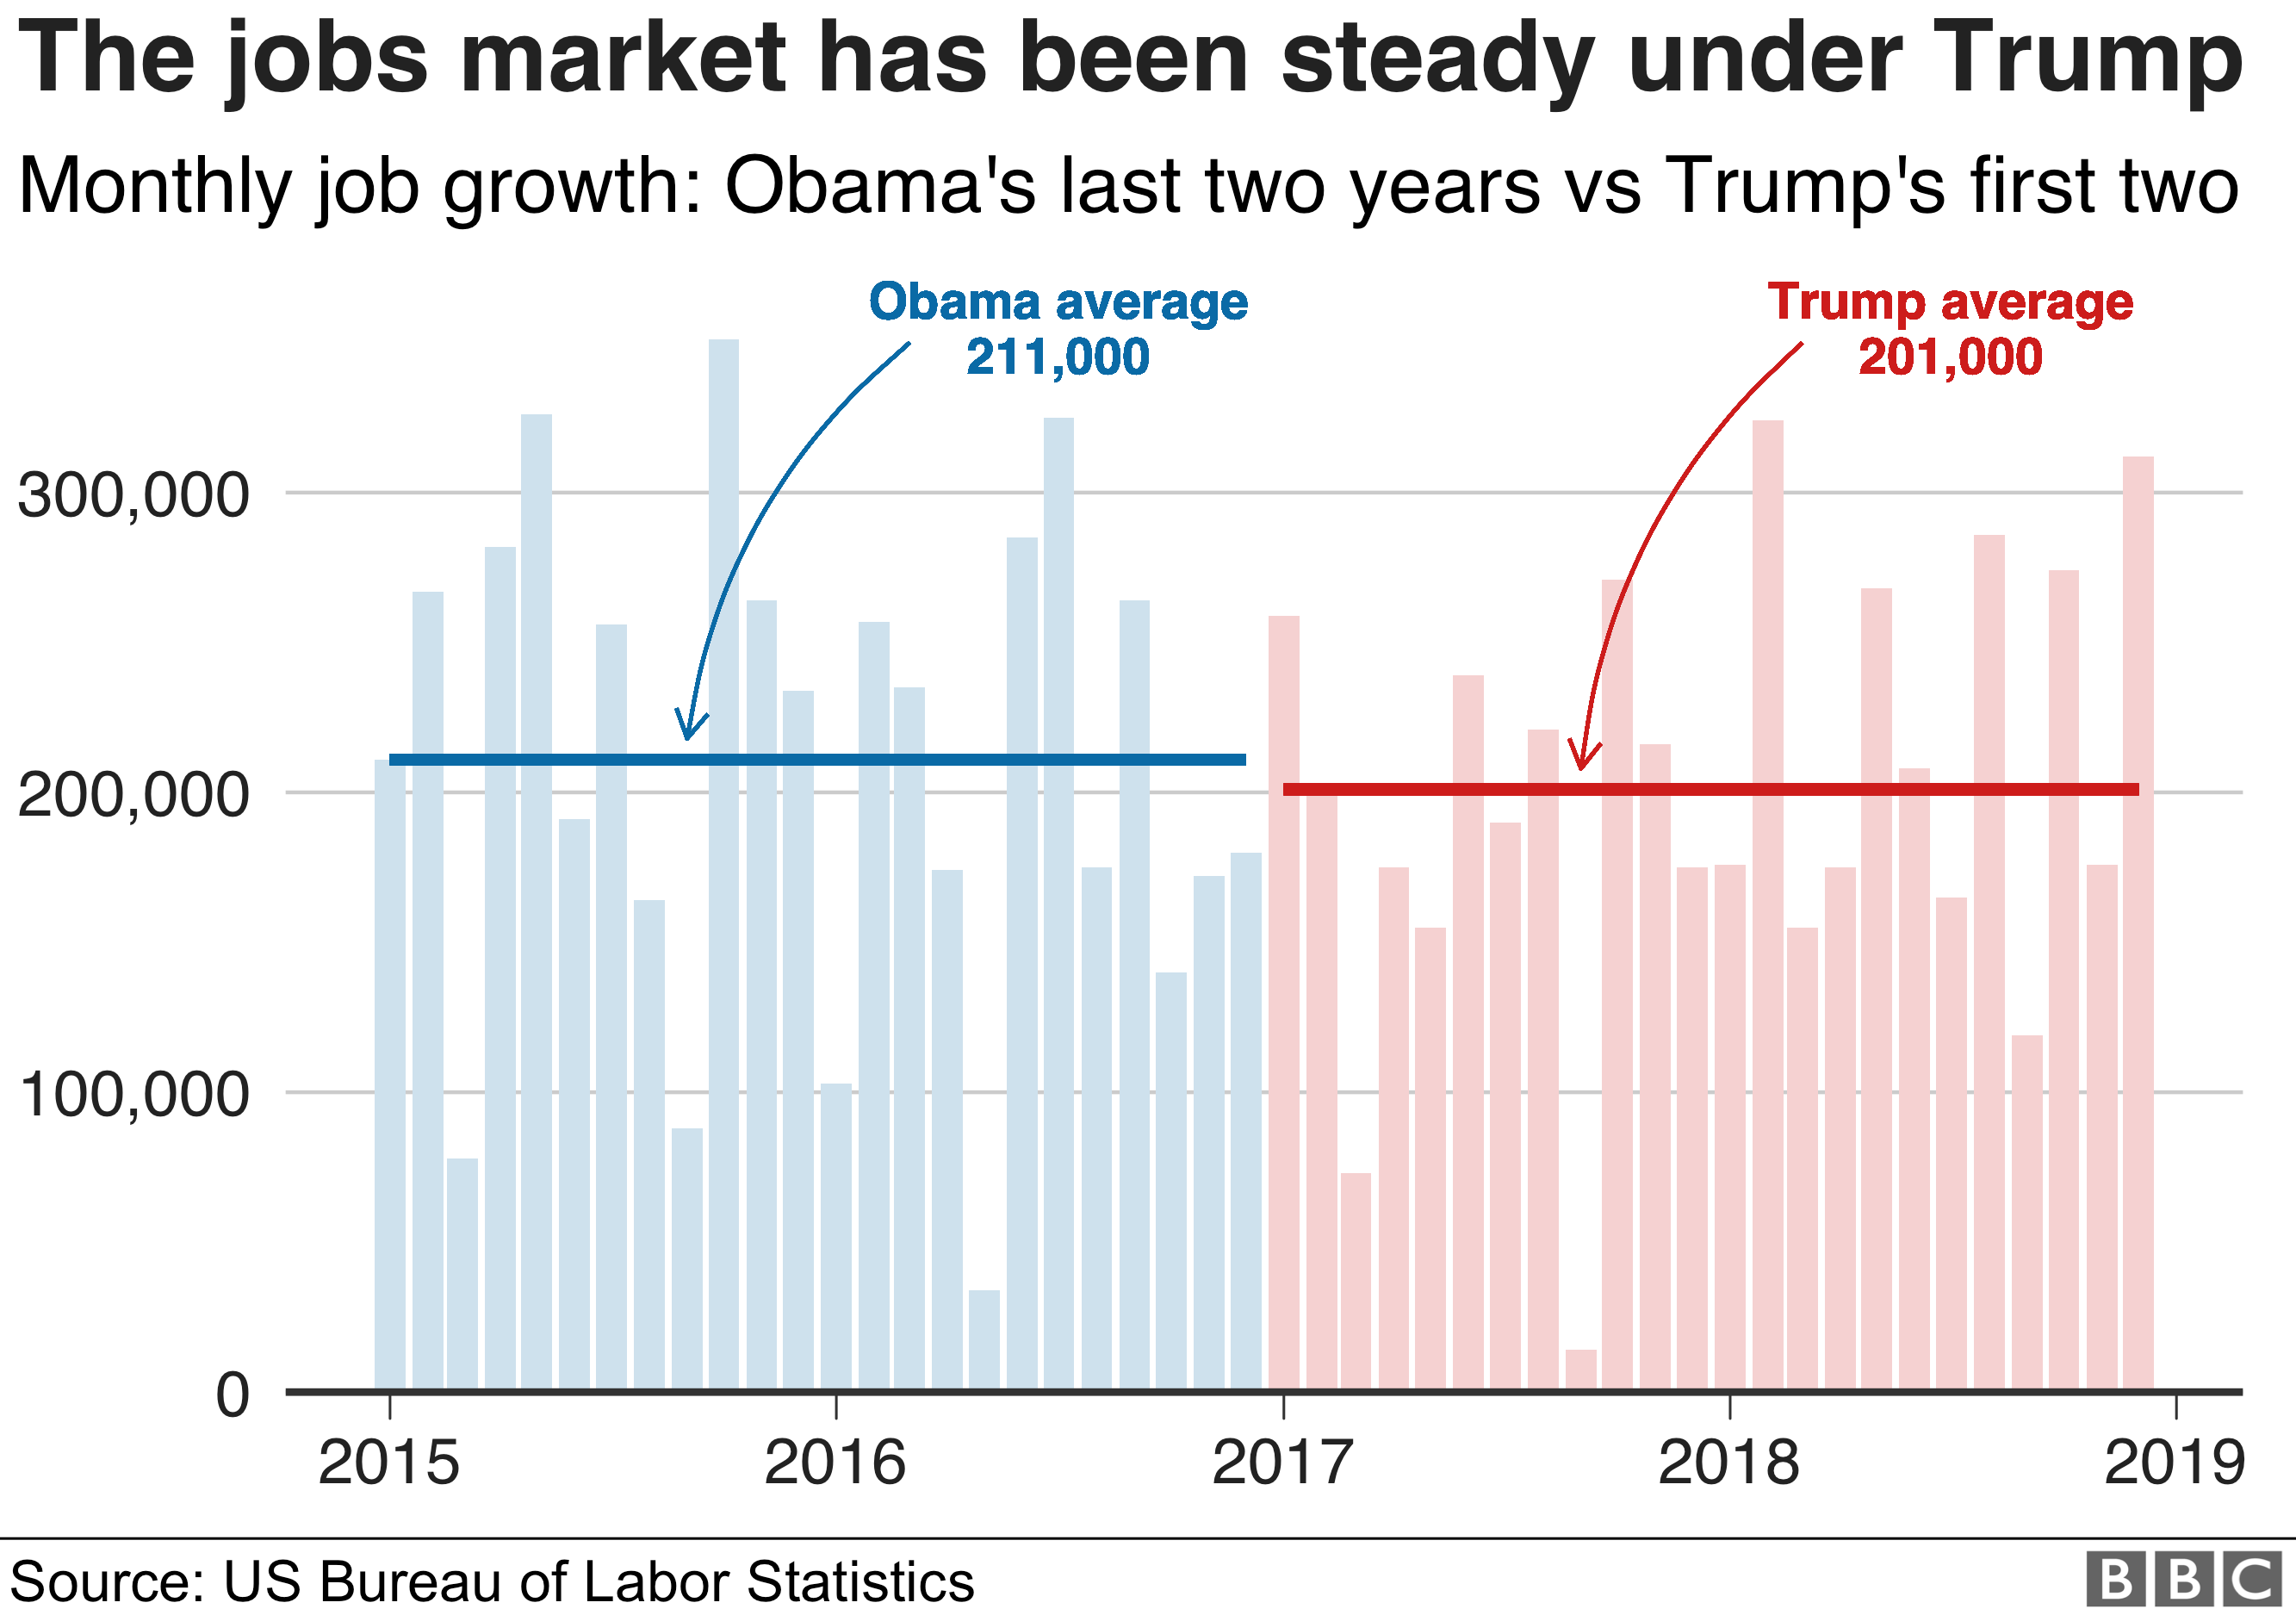 Chart showing how the US jobs market has continued to grow steadily under President Trump